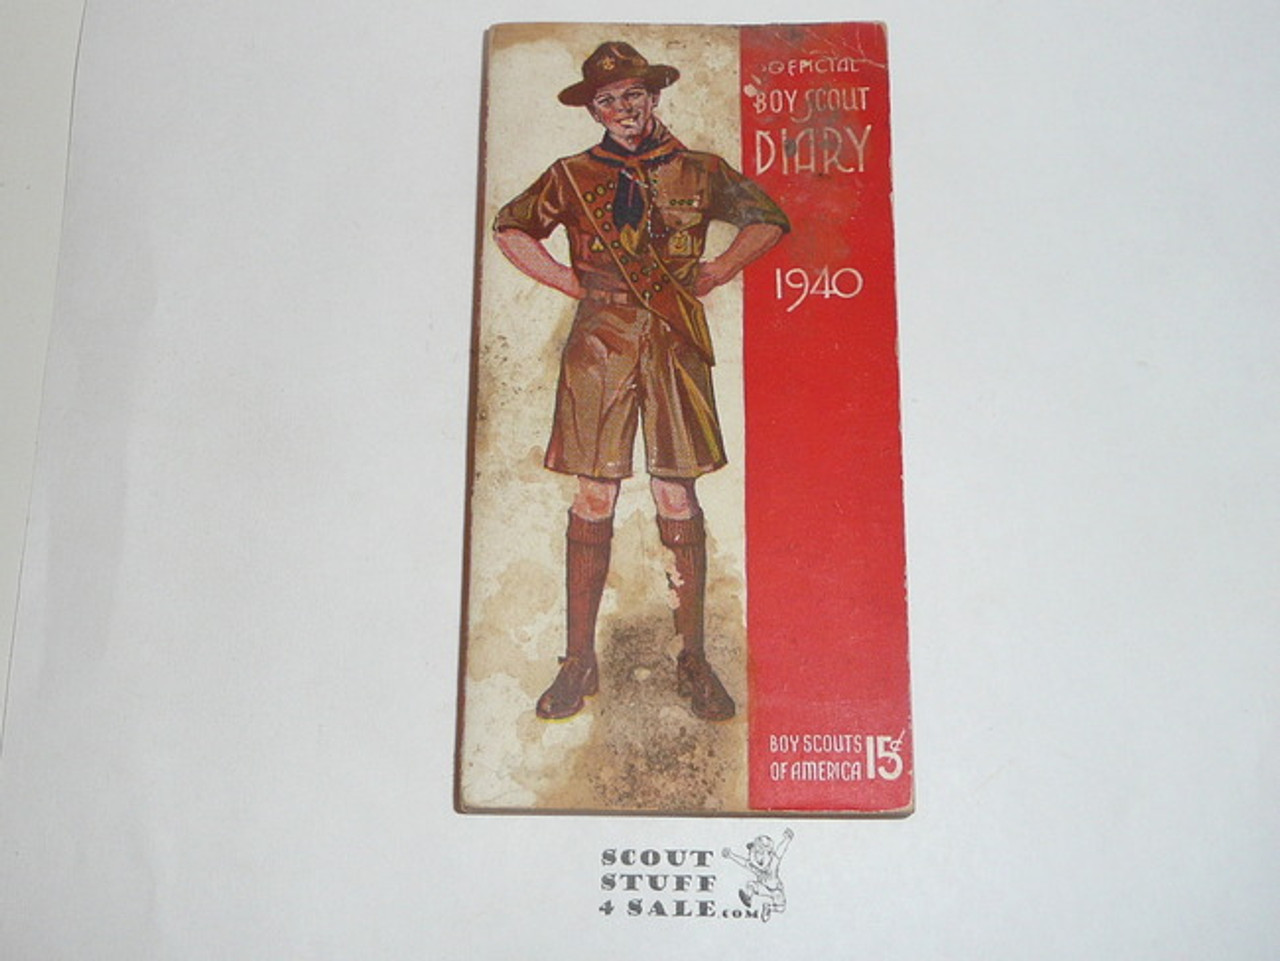 1940 Boy Scout Diary, some dirt on cover